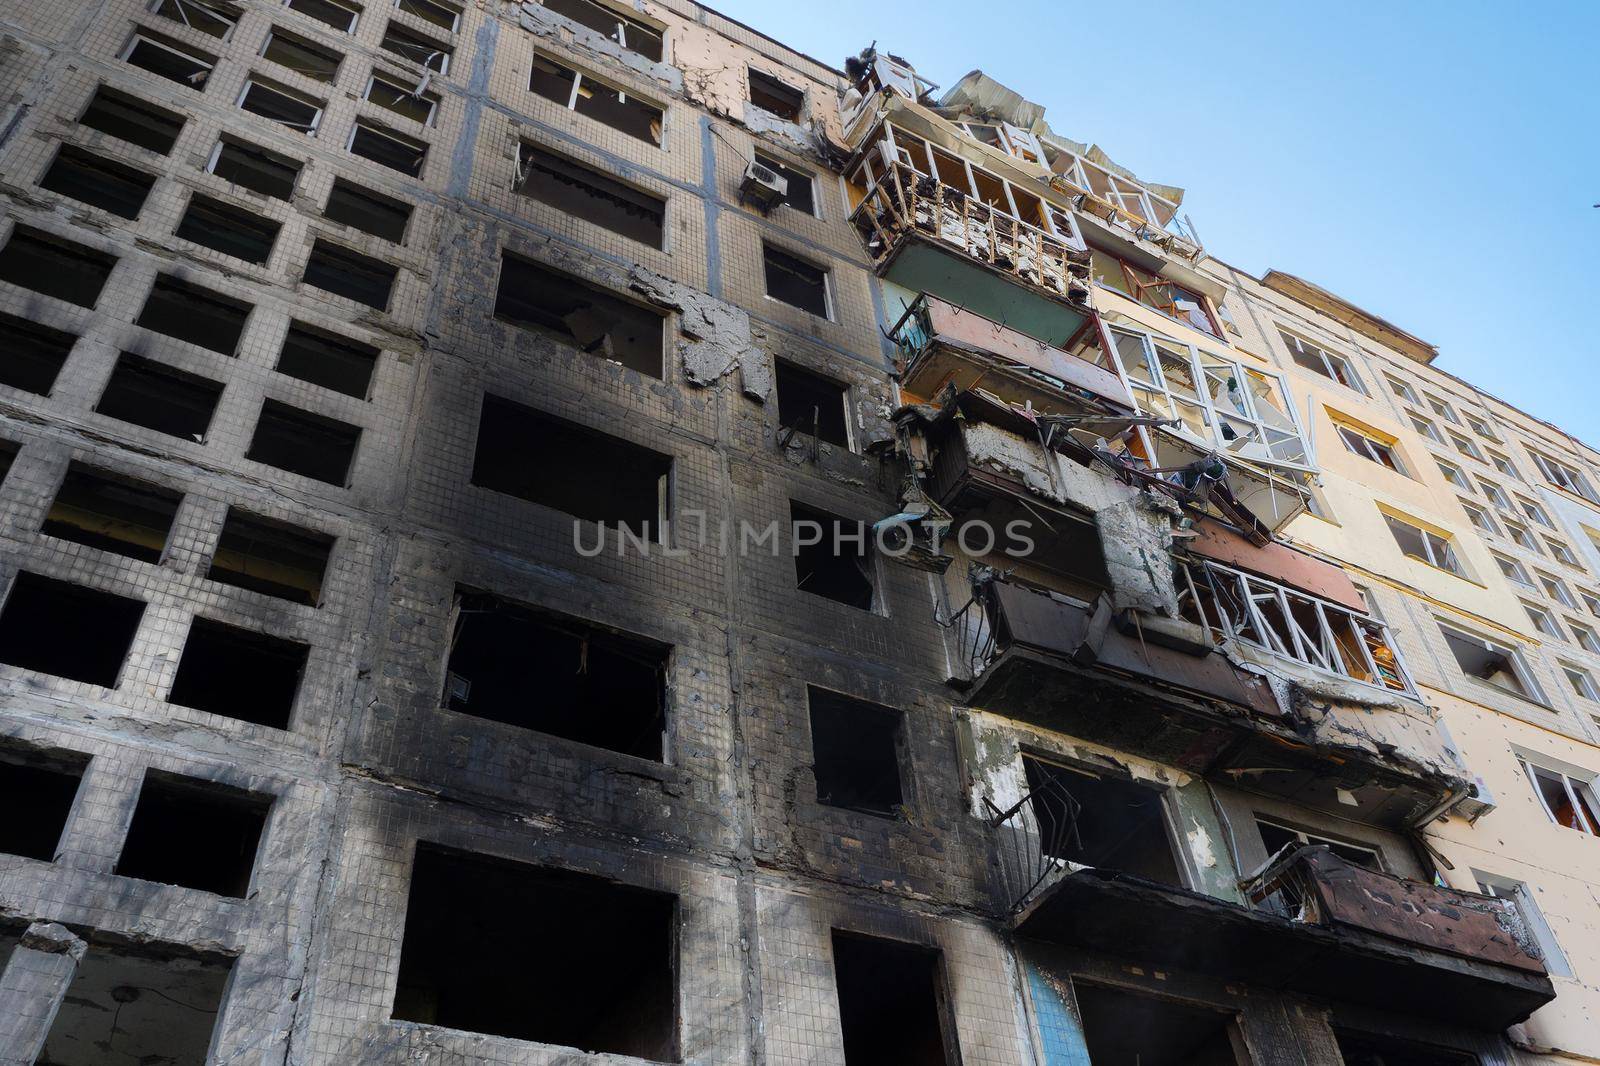 2022 Russian invasion of Ukraine bombed building destroyed Ukraine Russian fired. Rocket bomb attack Russia against Ukraine war destruction building ruins city destroyed Mariupol damaged Kyiv ruined